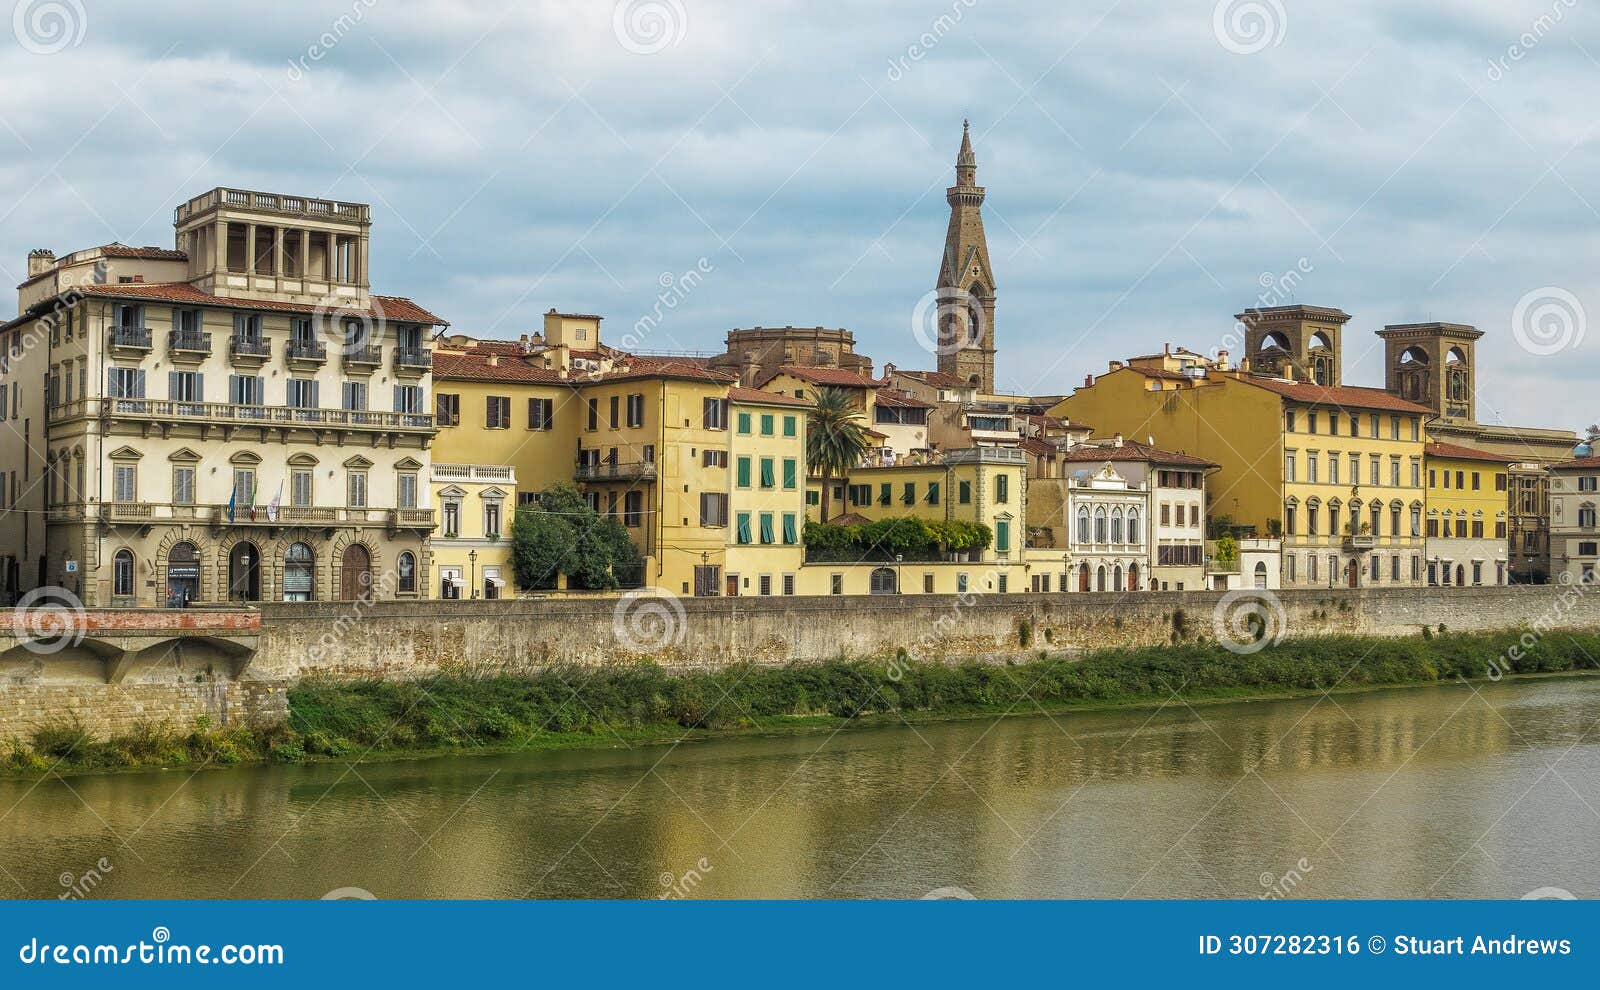 traditional buildings along the arno river, florence italy.